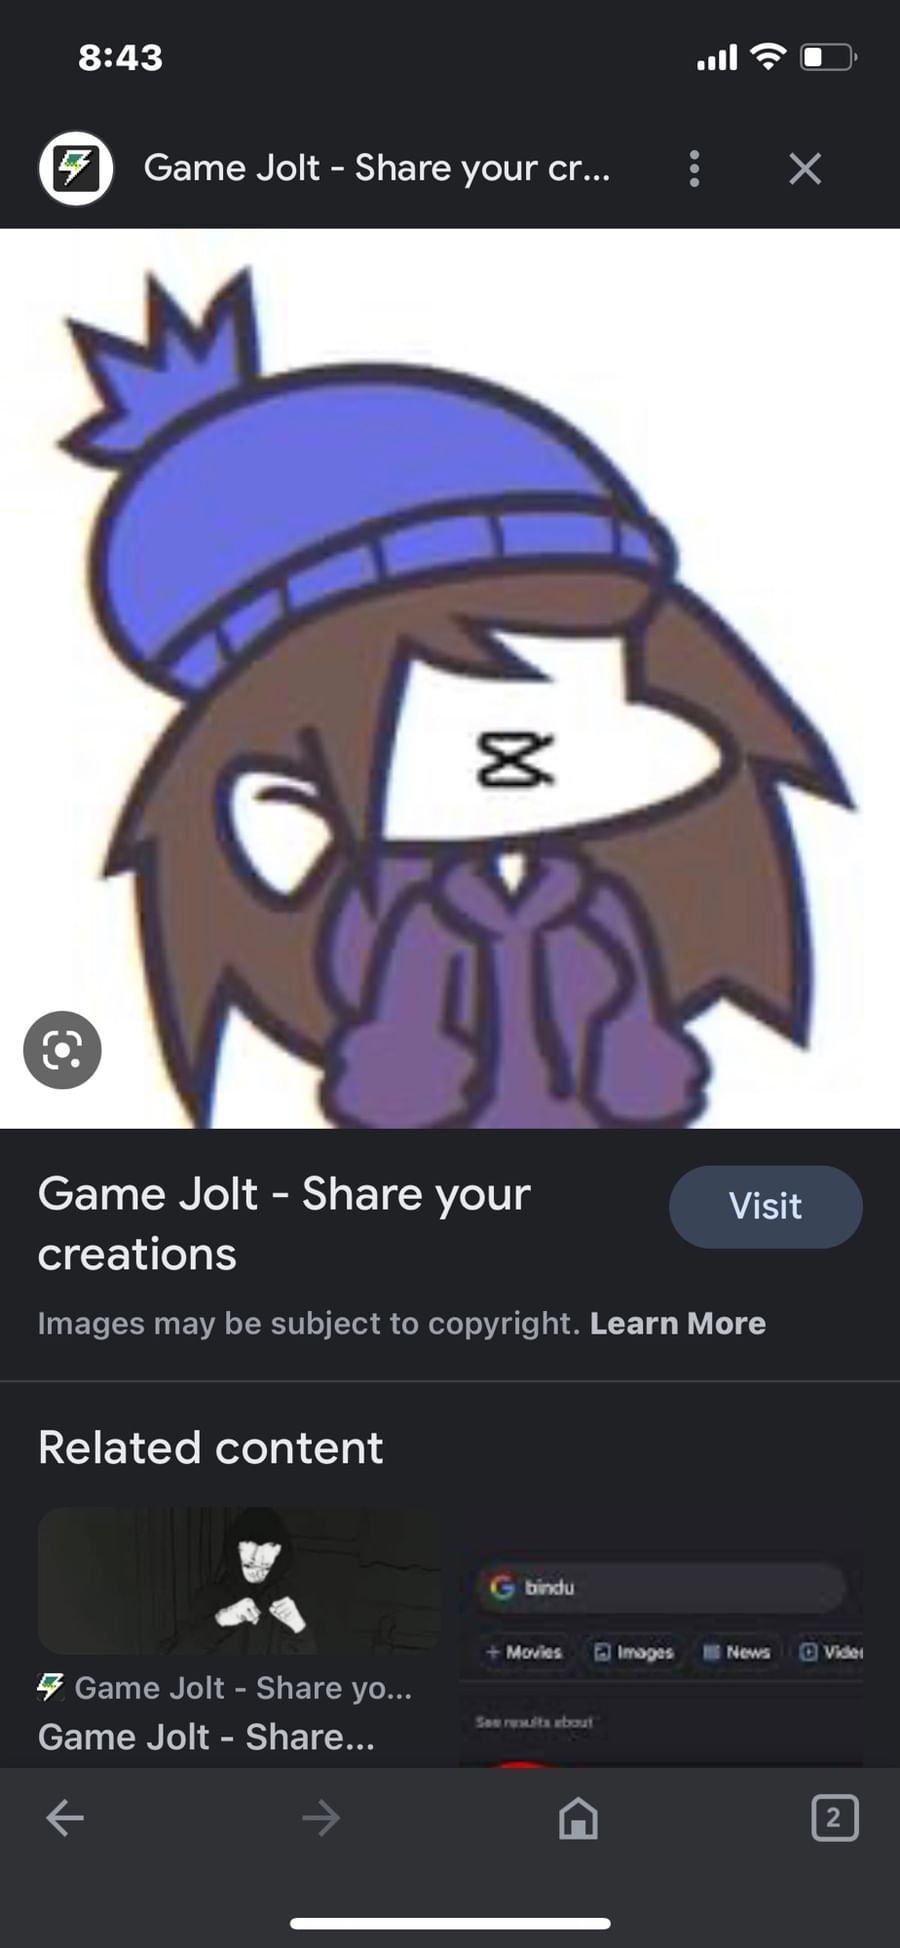 Game Jolt - Share your creations